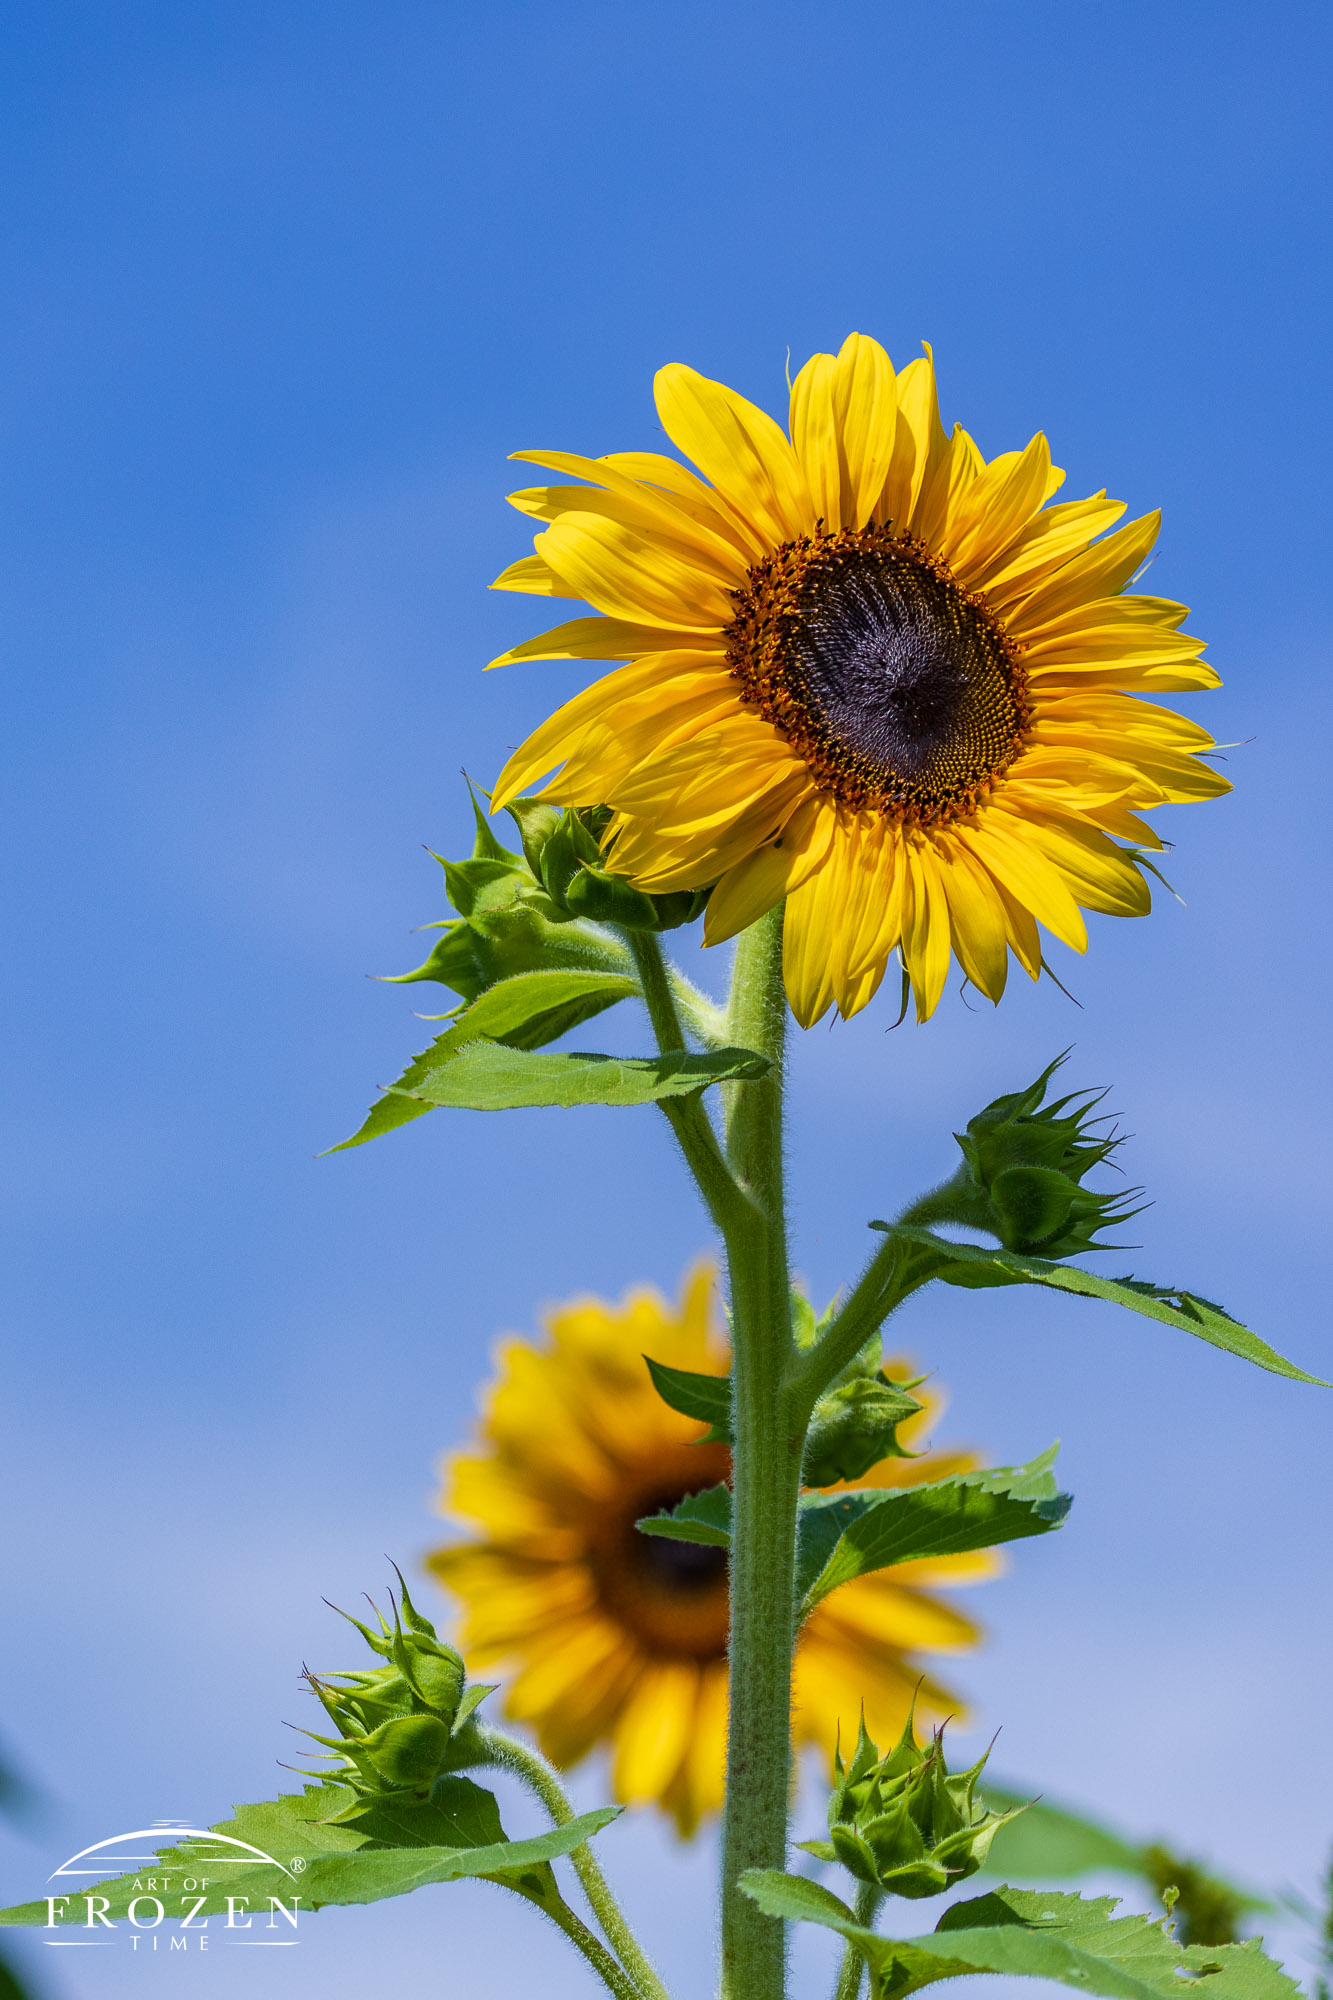 Two sunflowers standing tall in a field under blue skies